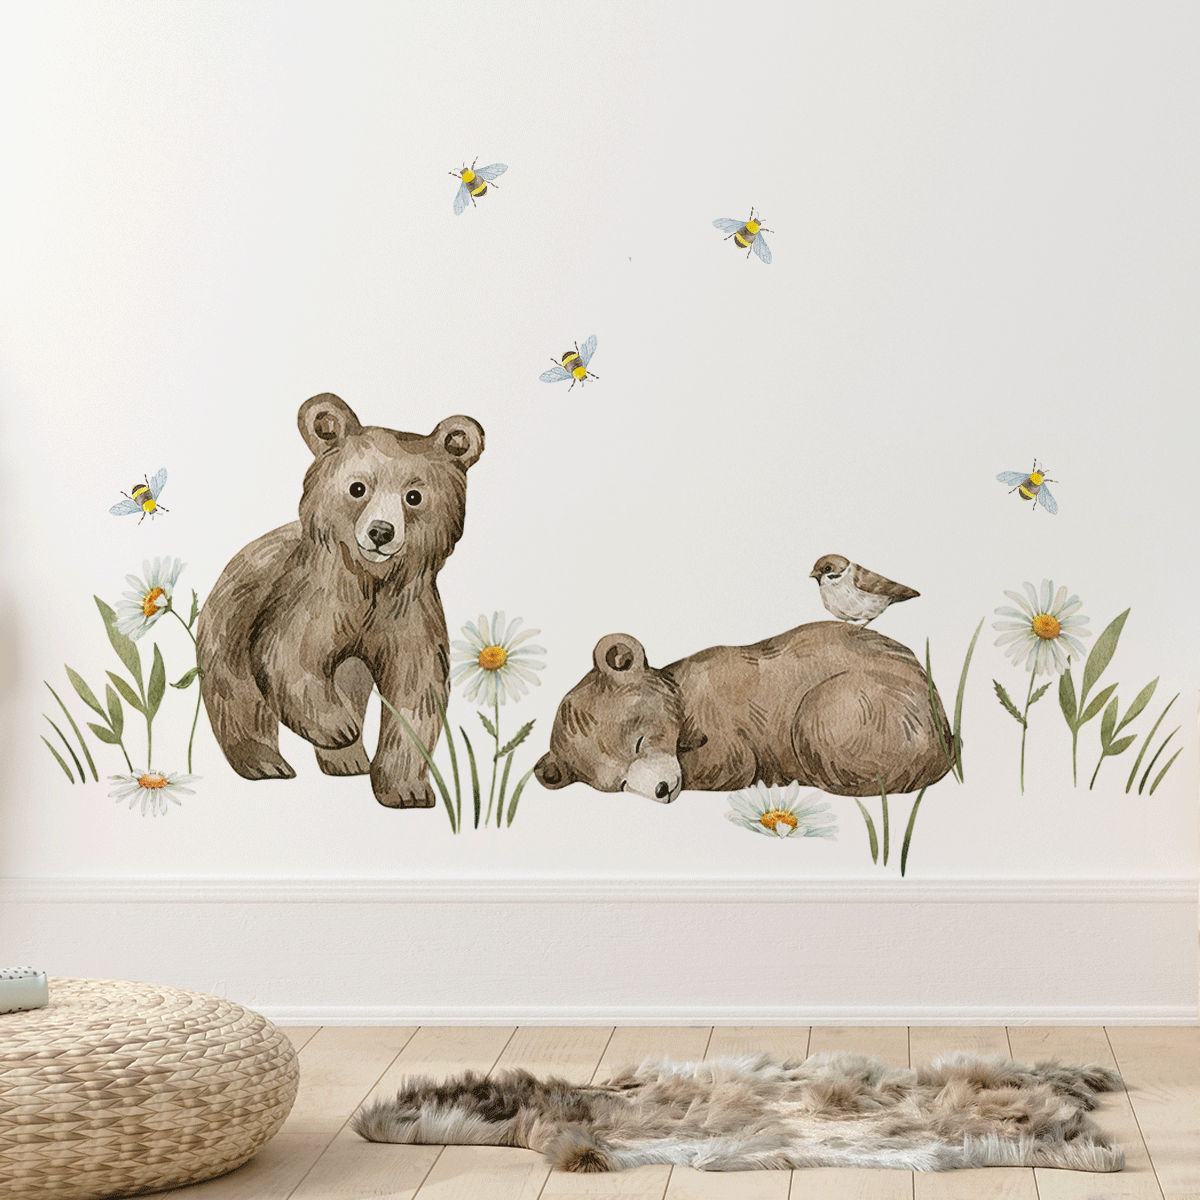 Woodland wall stickers - Magical forest - bears